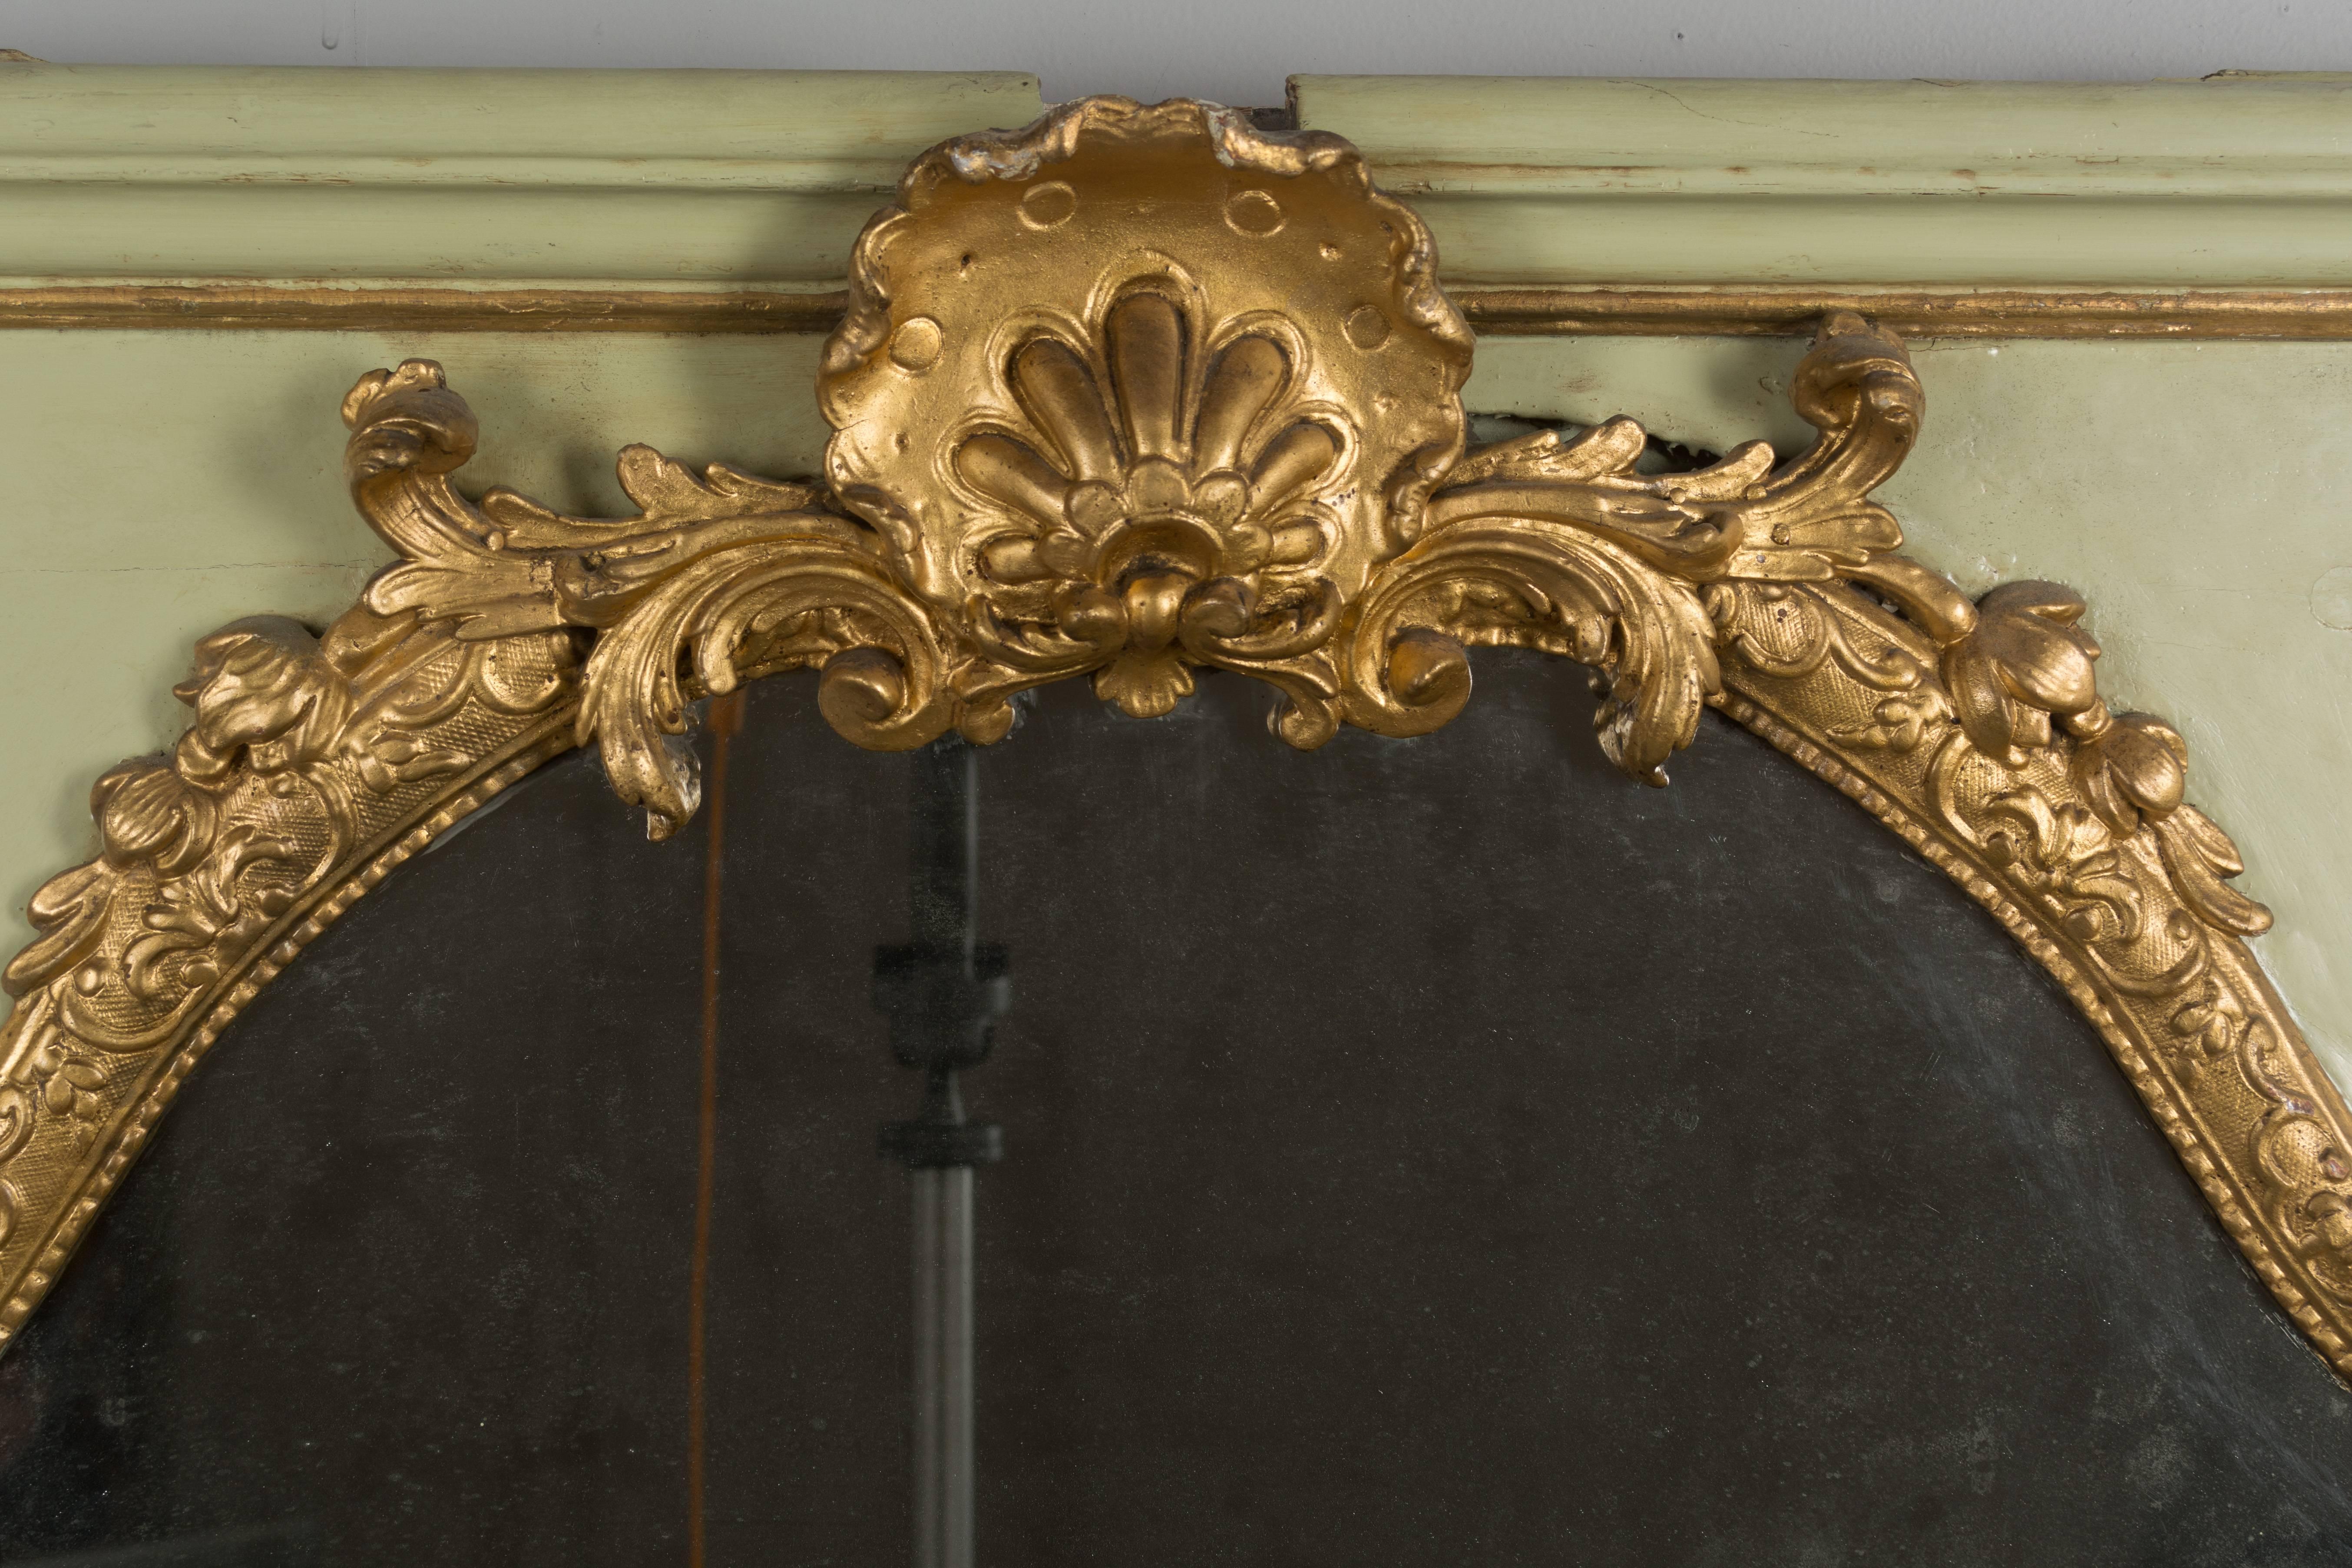 An 18th century Louis XVI French trumeau that was part of a boiseries, or wall paneling. Original mirror in three parts with old silvering. Parcel-gilt frame made of pine with pale green painted surface and gilded carved decoration. Resurfaced paint